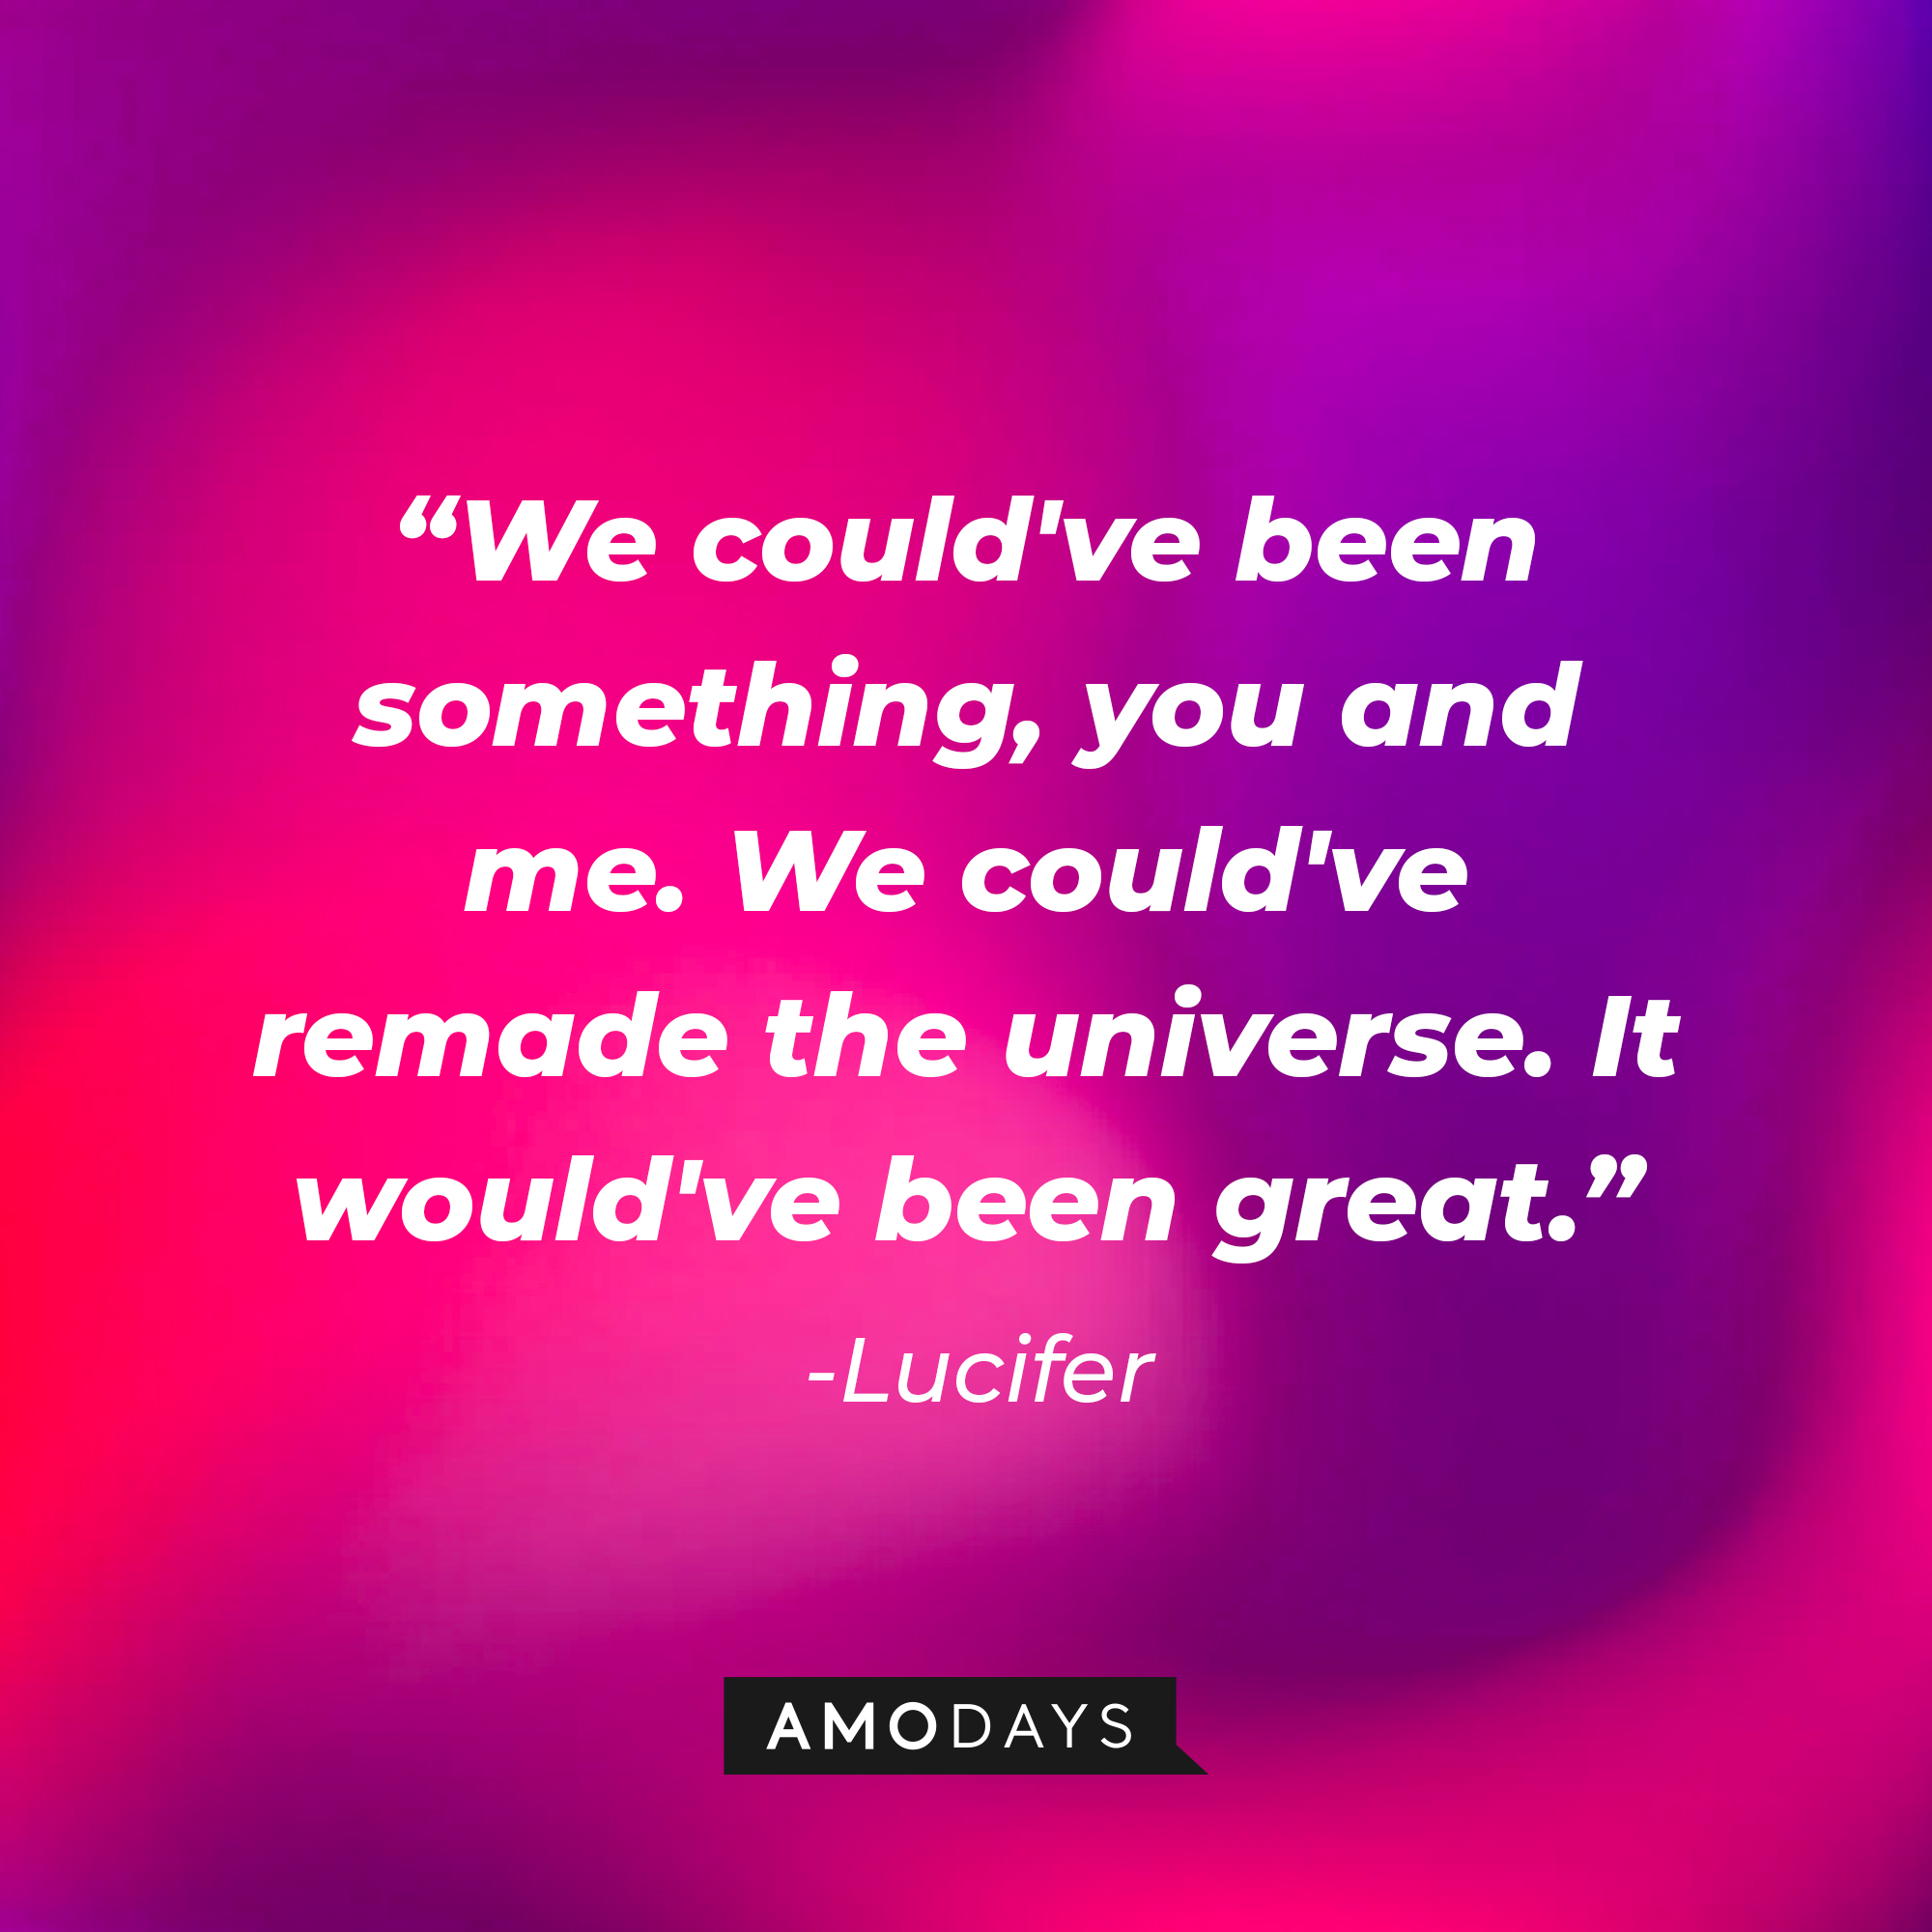 Lucifer’s quote: "We could've been something, you and me. We could've remade the universe. It would've been great." | Source: AmoDays